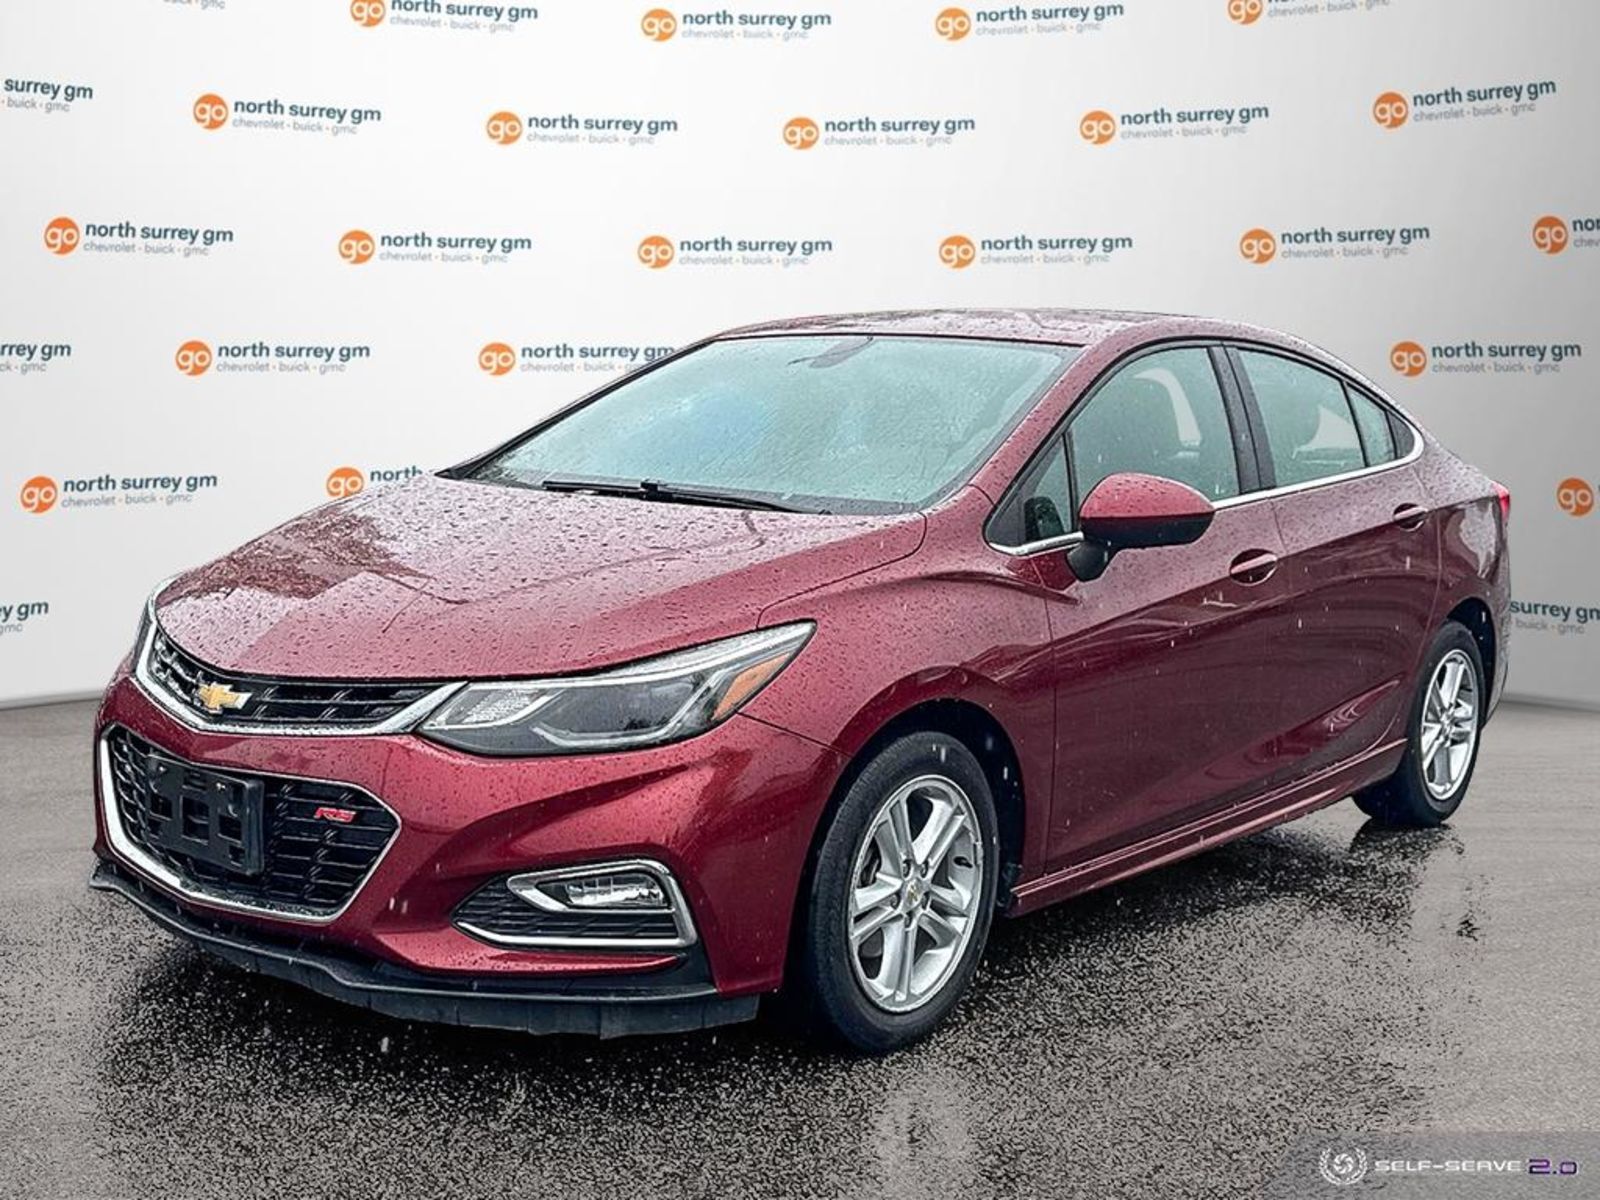 2016 Chevrolet Cruze LT - Leather / Rear View Cam / Apple CarPlay / And